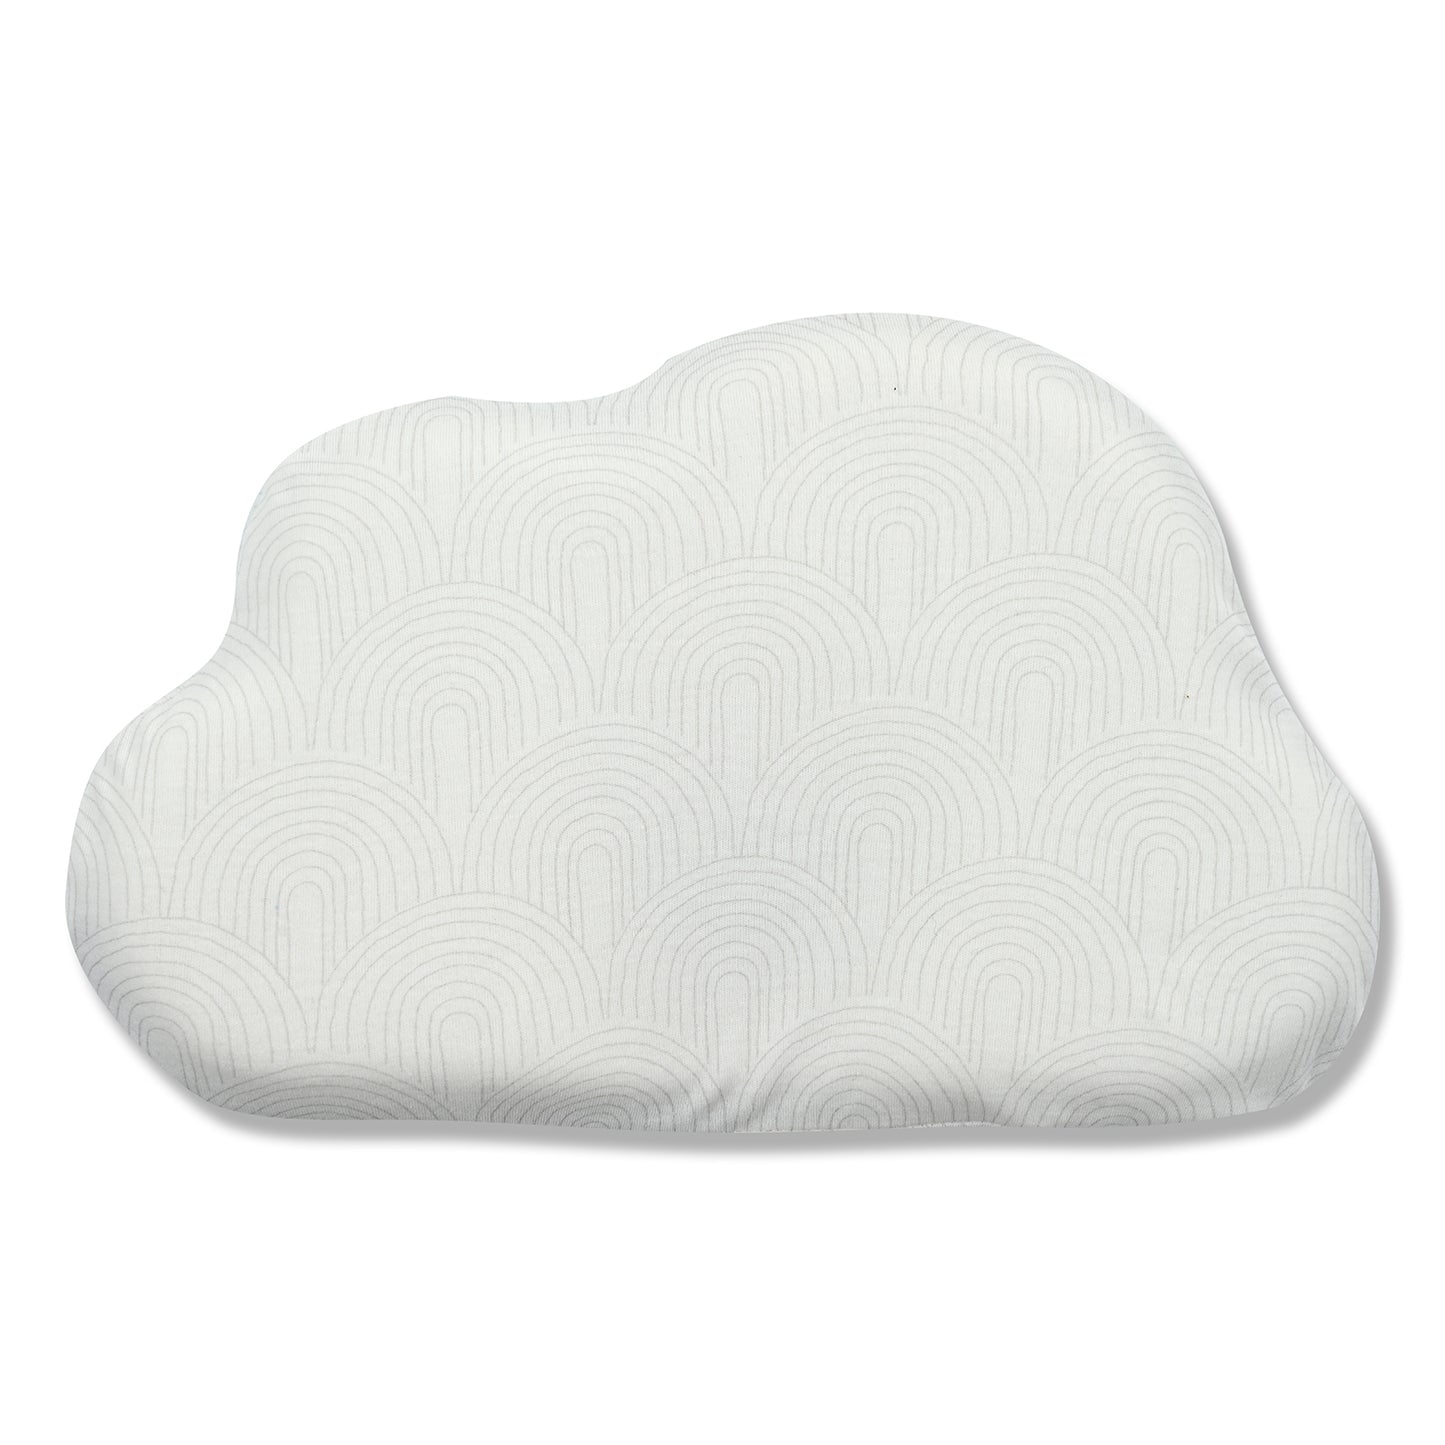 Anti Flat Head Pillow with Removable Cover